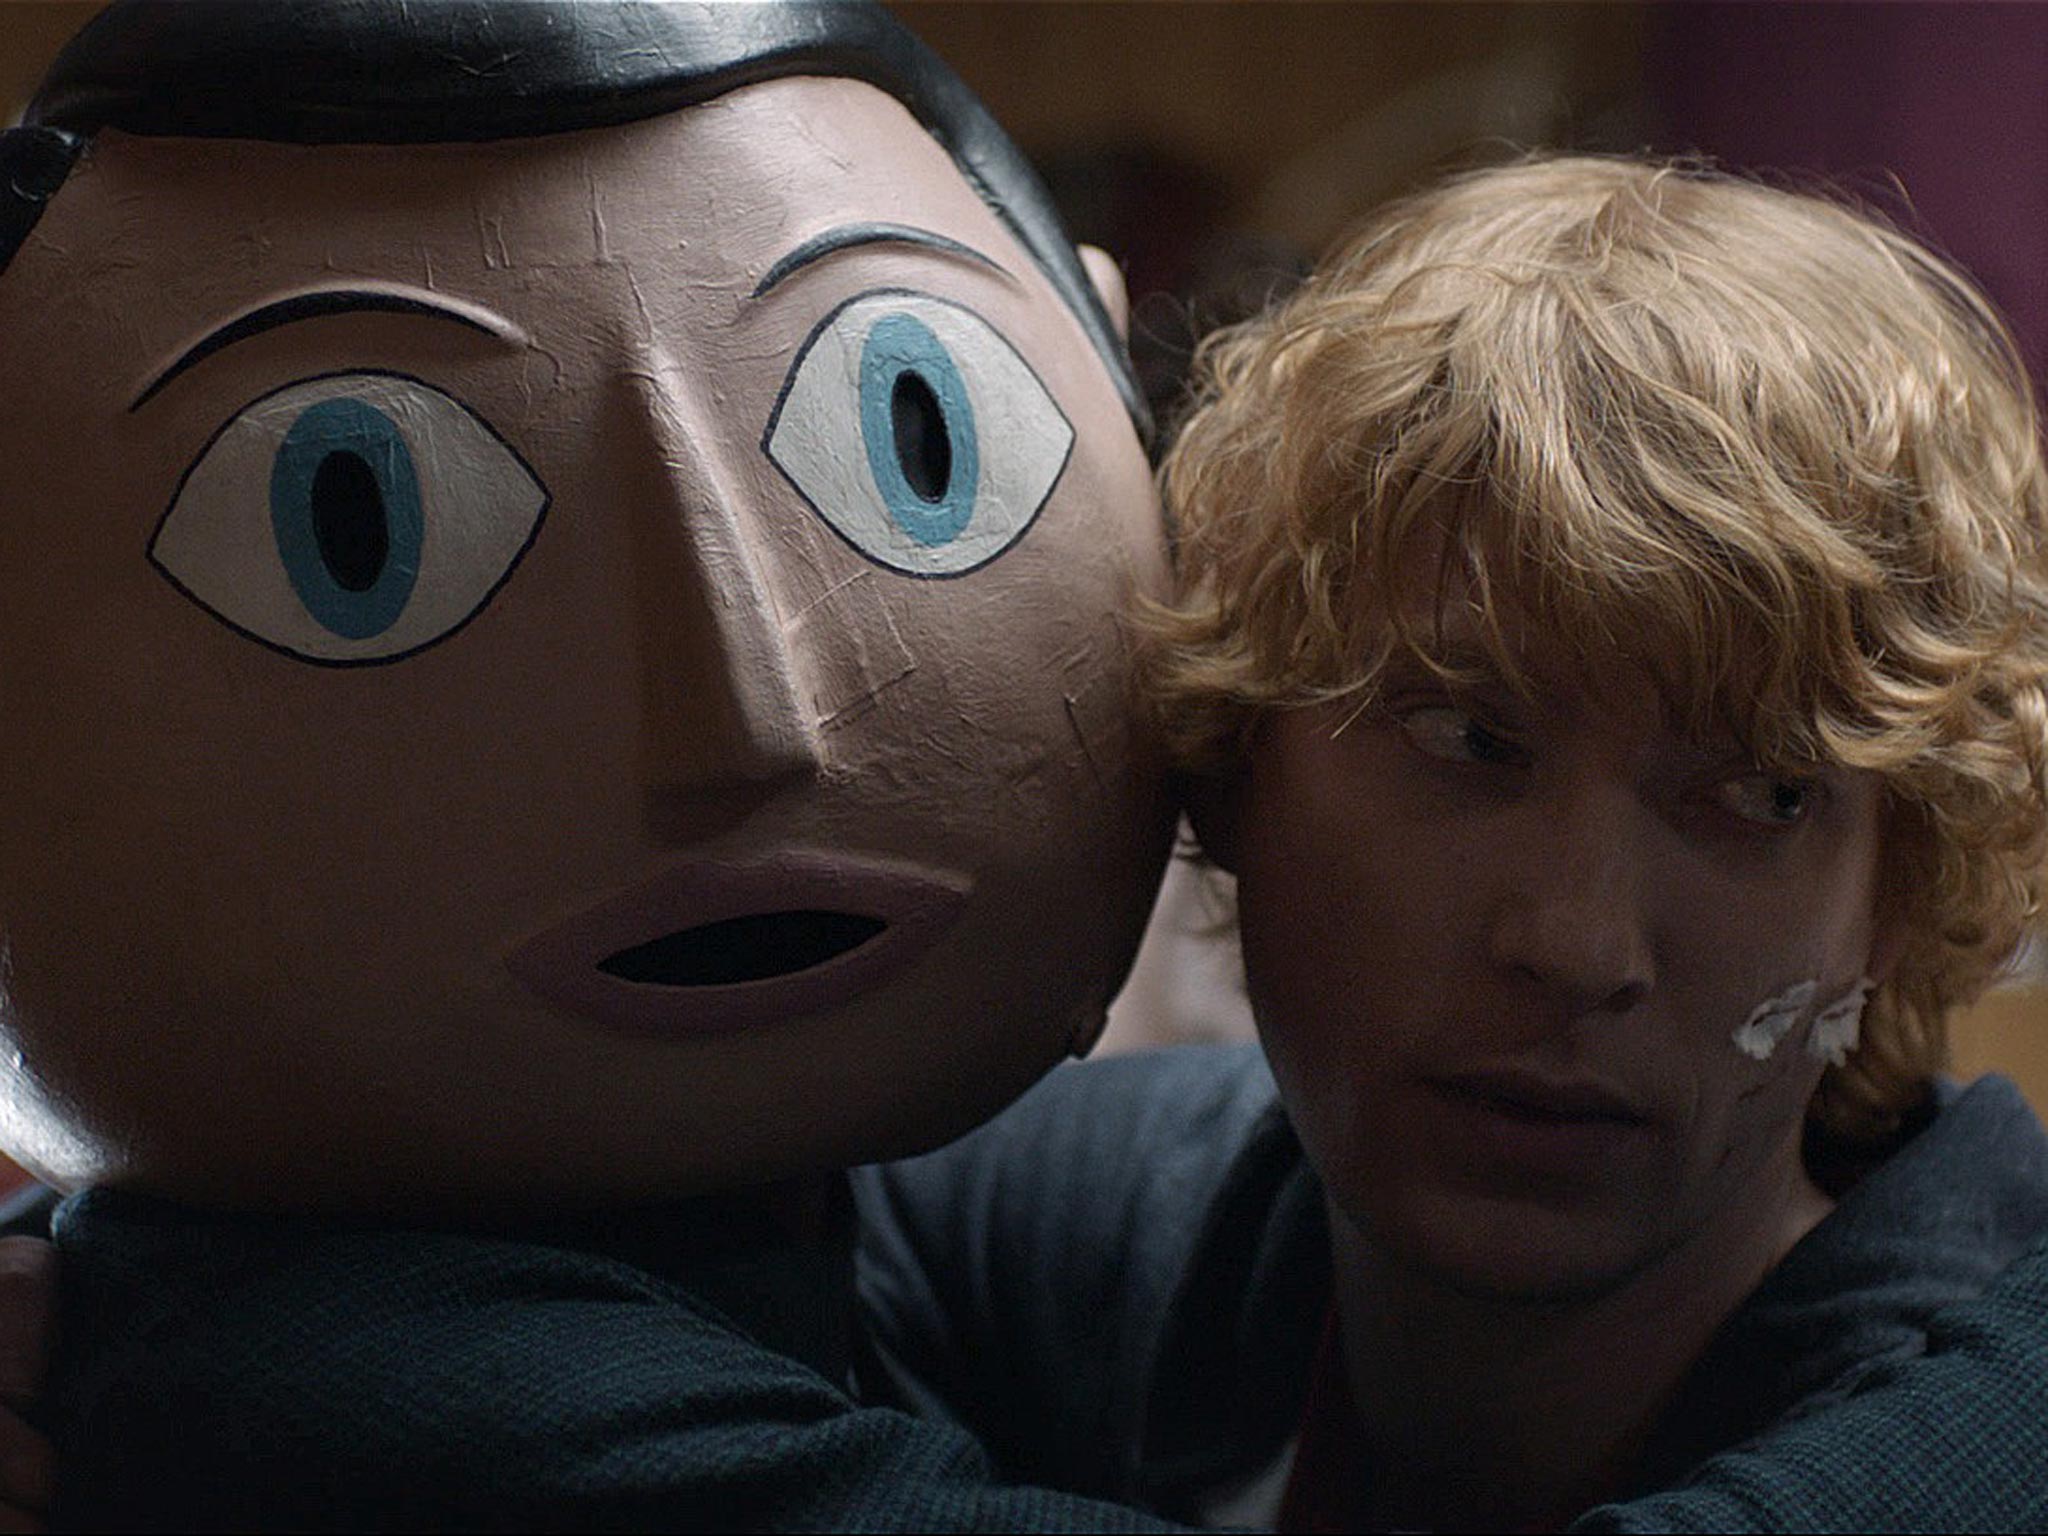 Michael Fassbender and Domhnall Gleeson in ‘Frank’